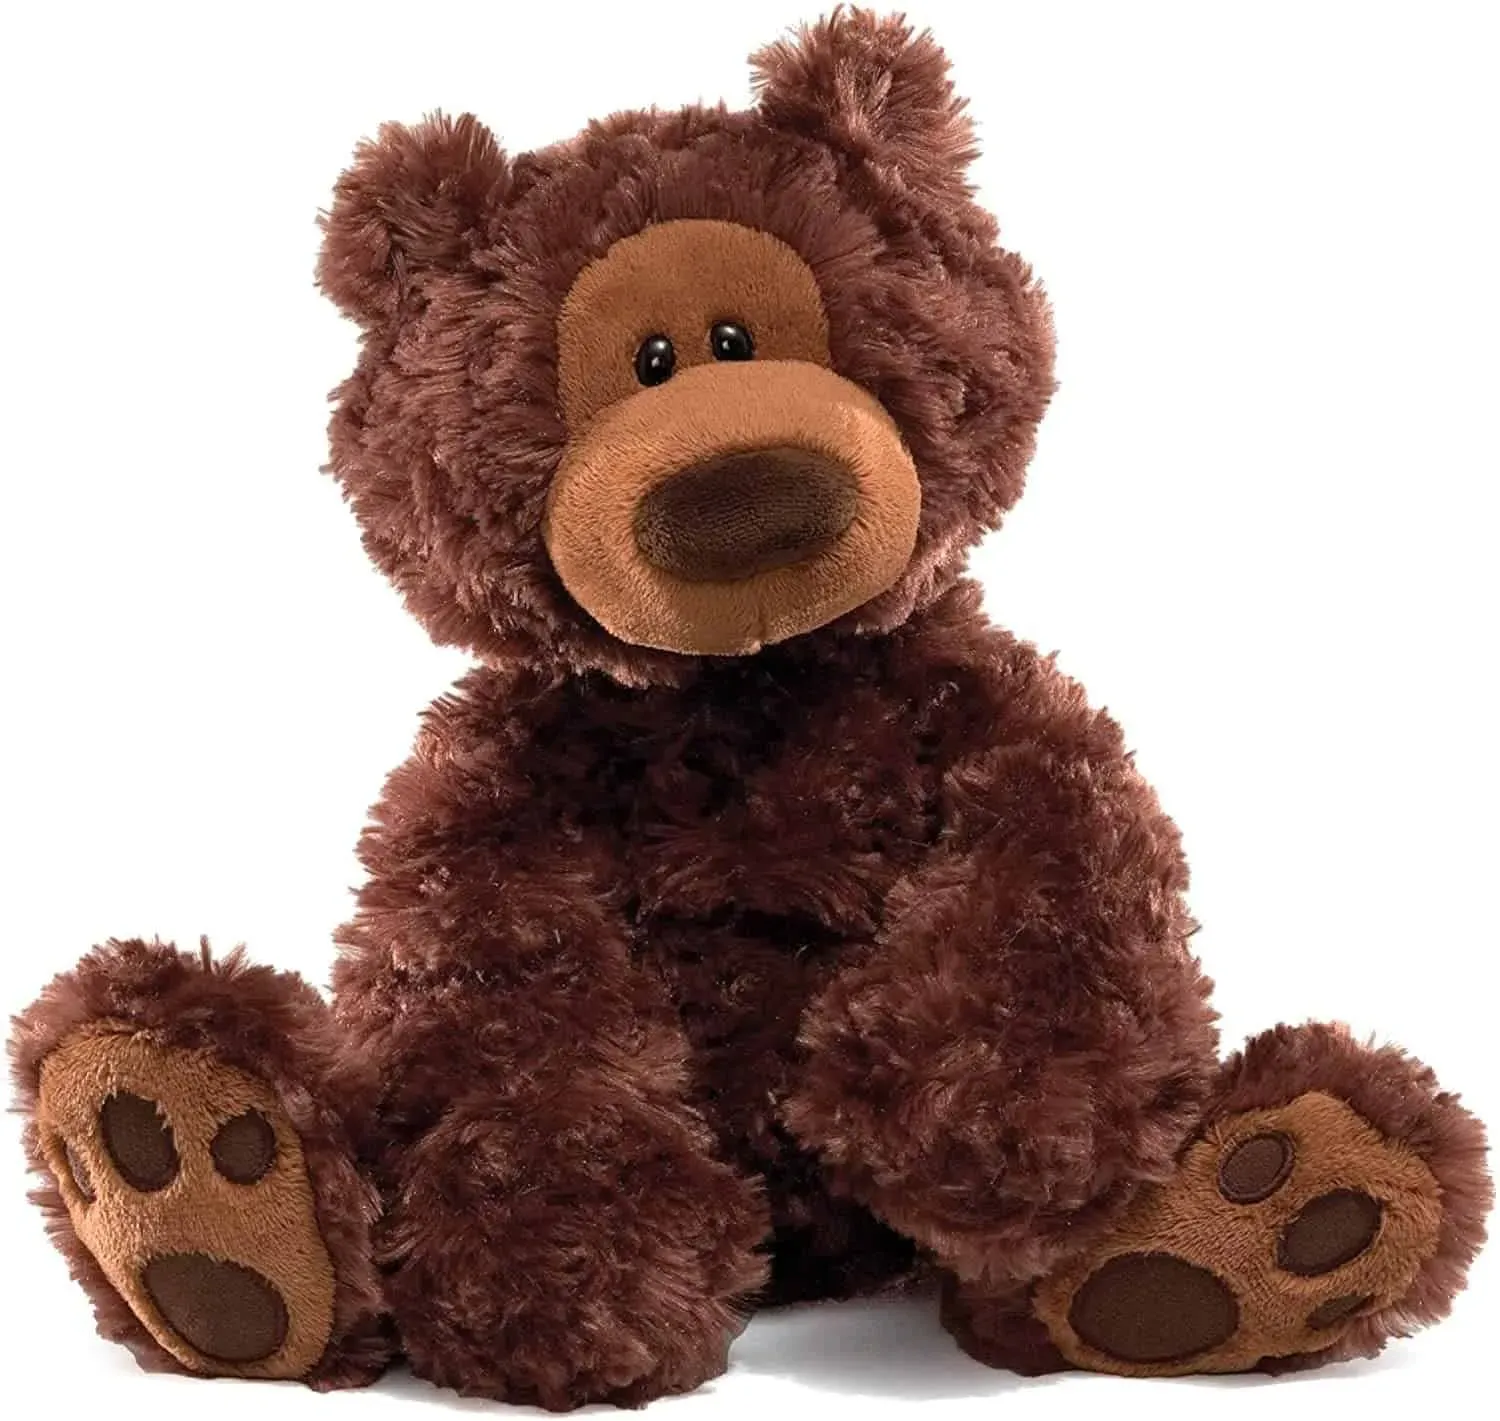 Soft and cuddly Chocolate Philbin Teddy Bear best for babies.